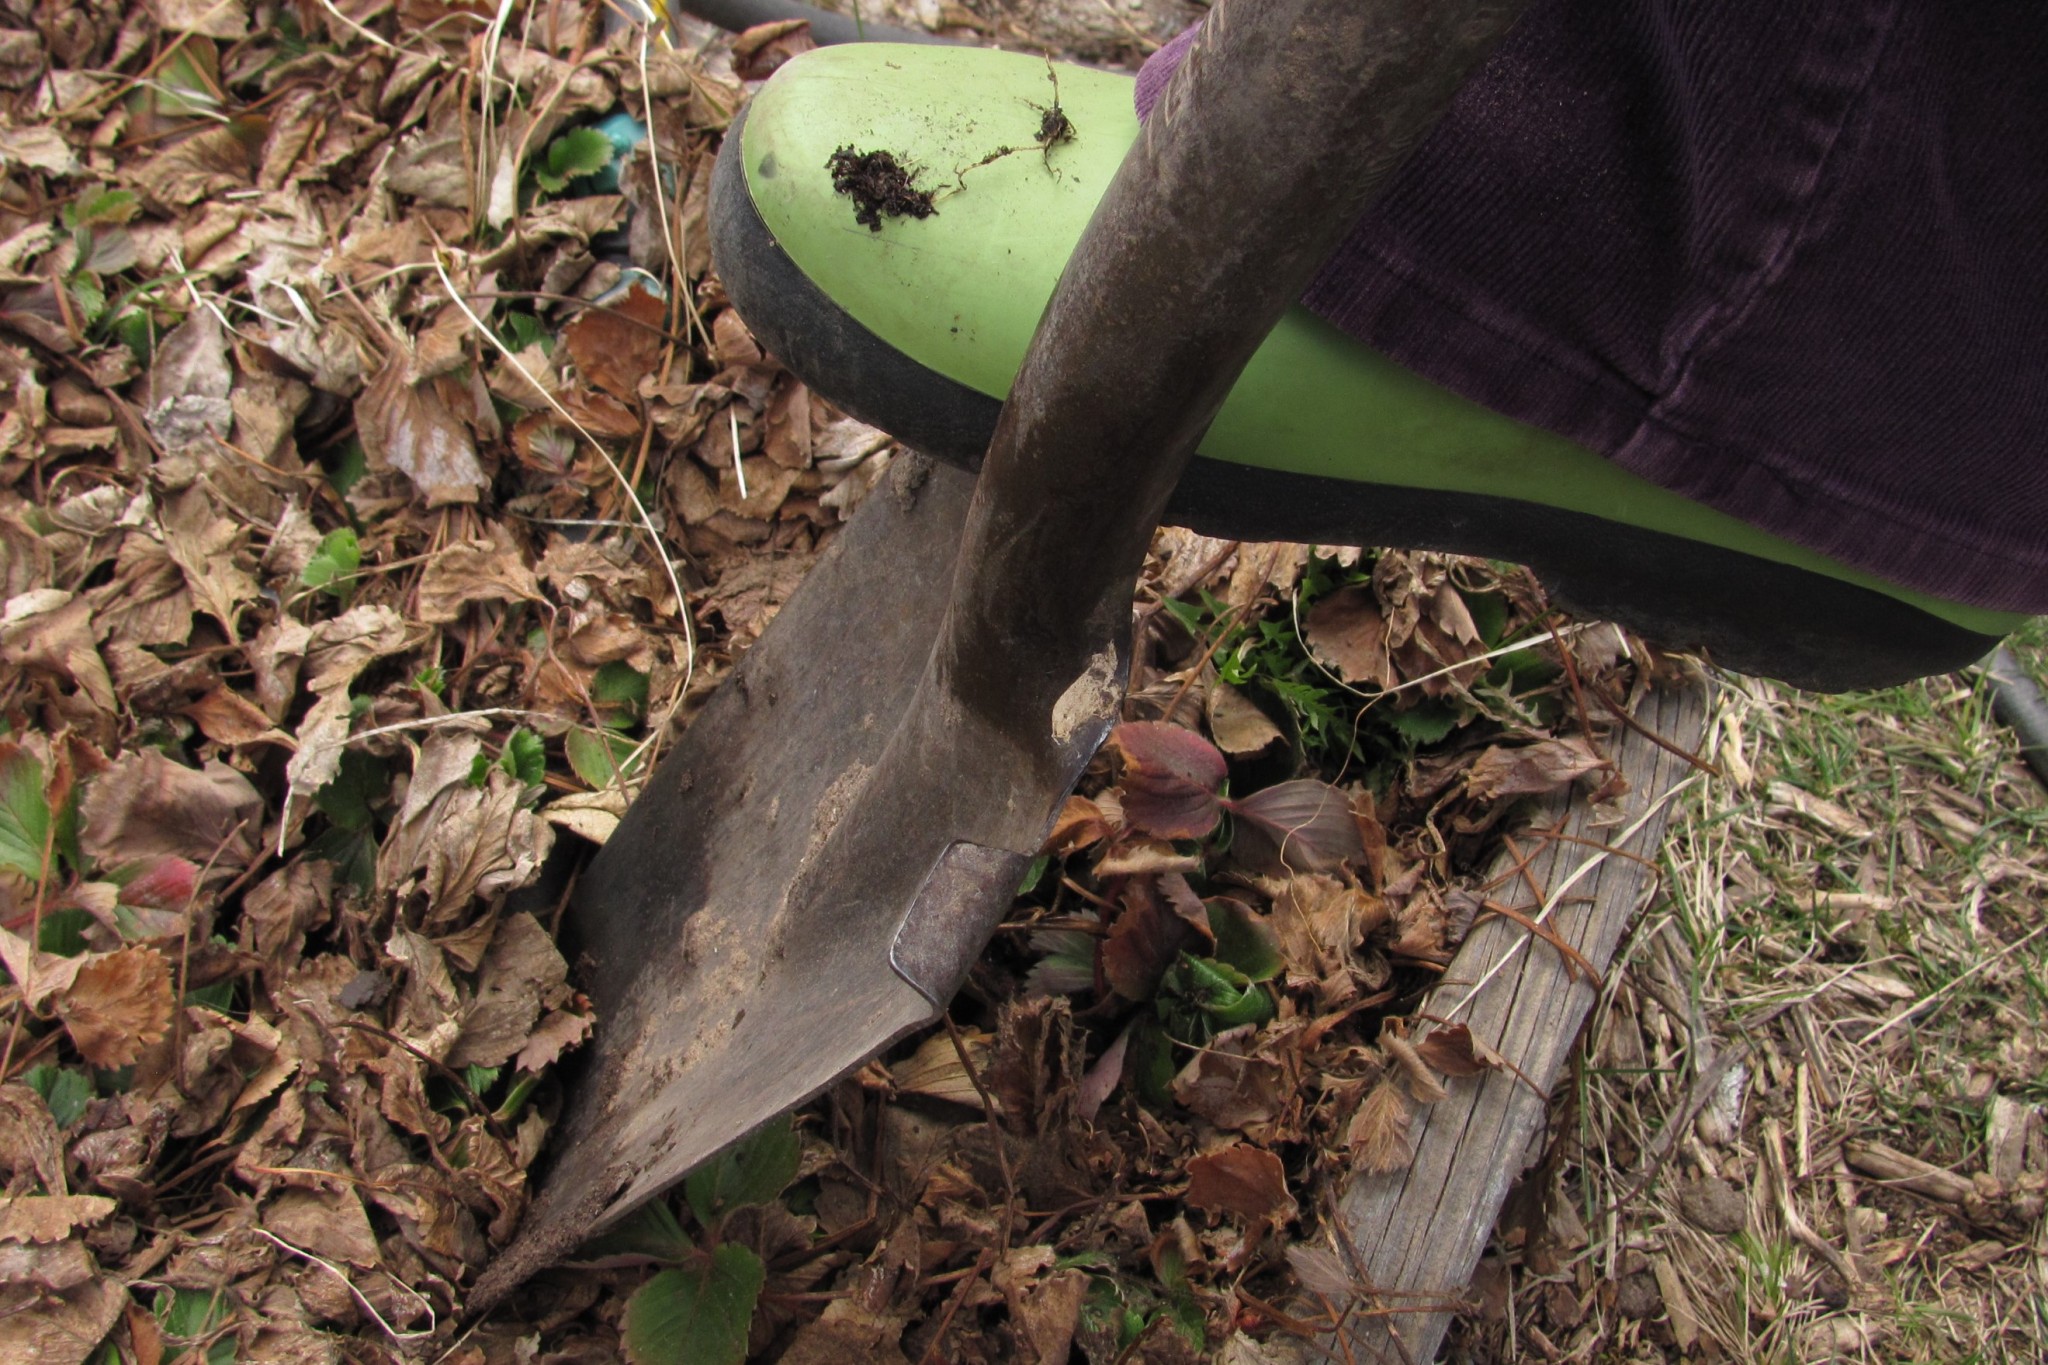 2016-5-Kathy Shreve's tiling or trenching spade by Barb Gorges